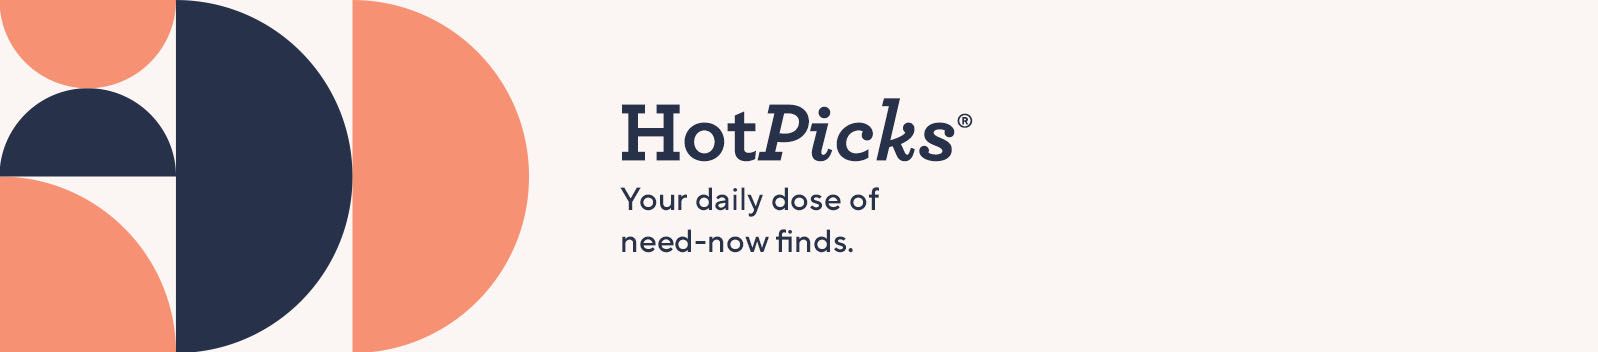 HotPicks®: Your daily dose of need-now finds.